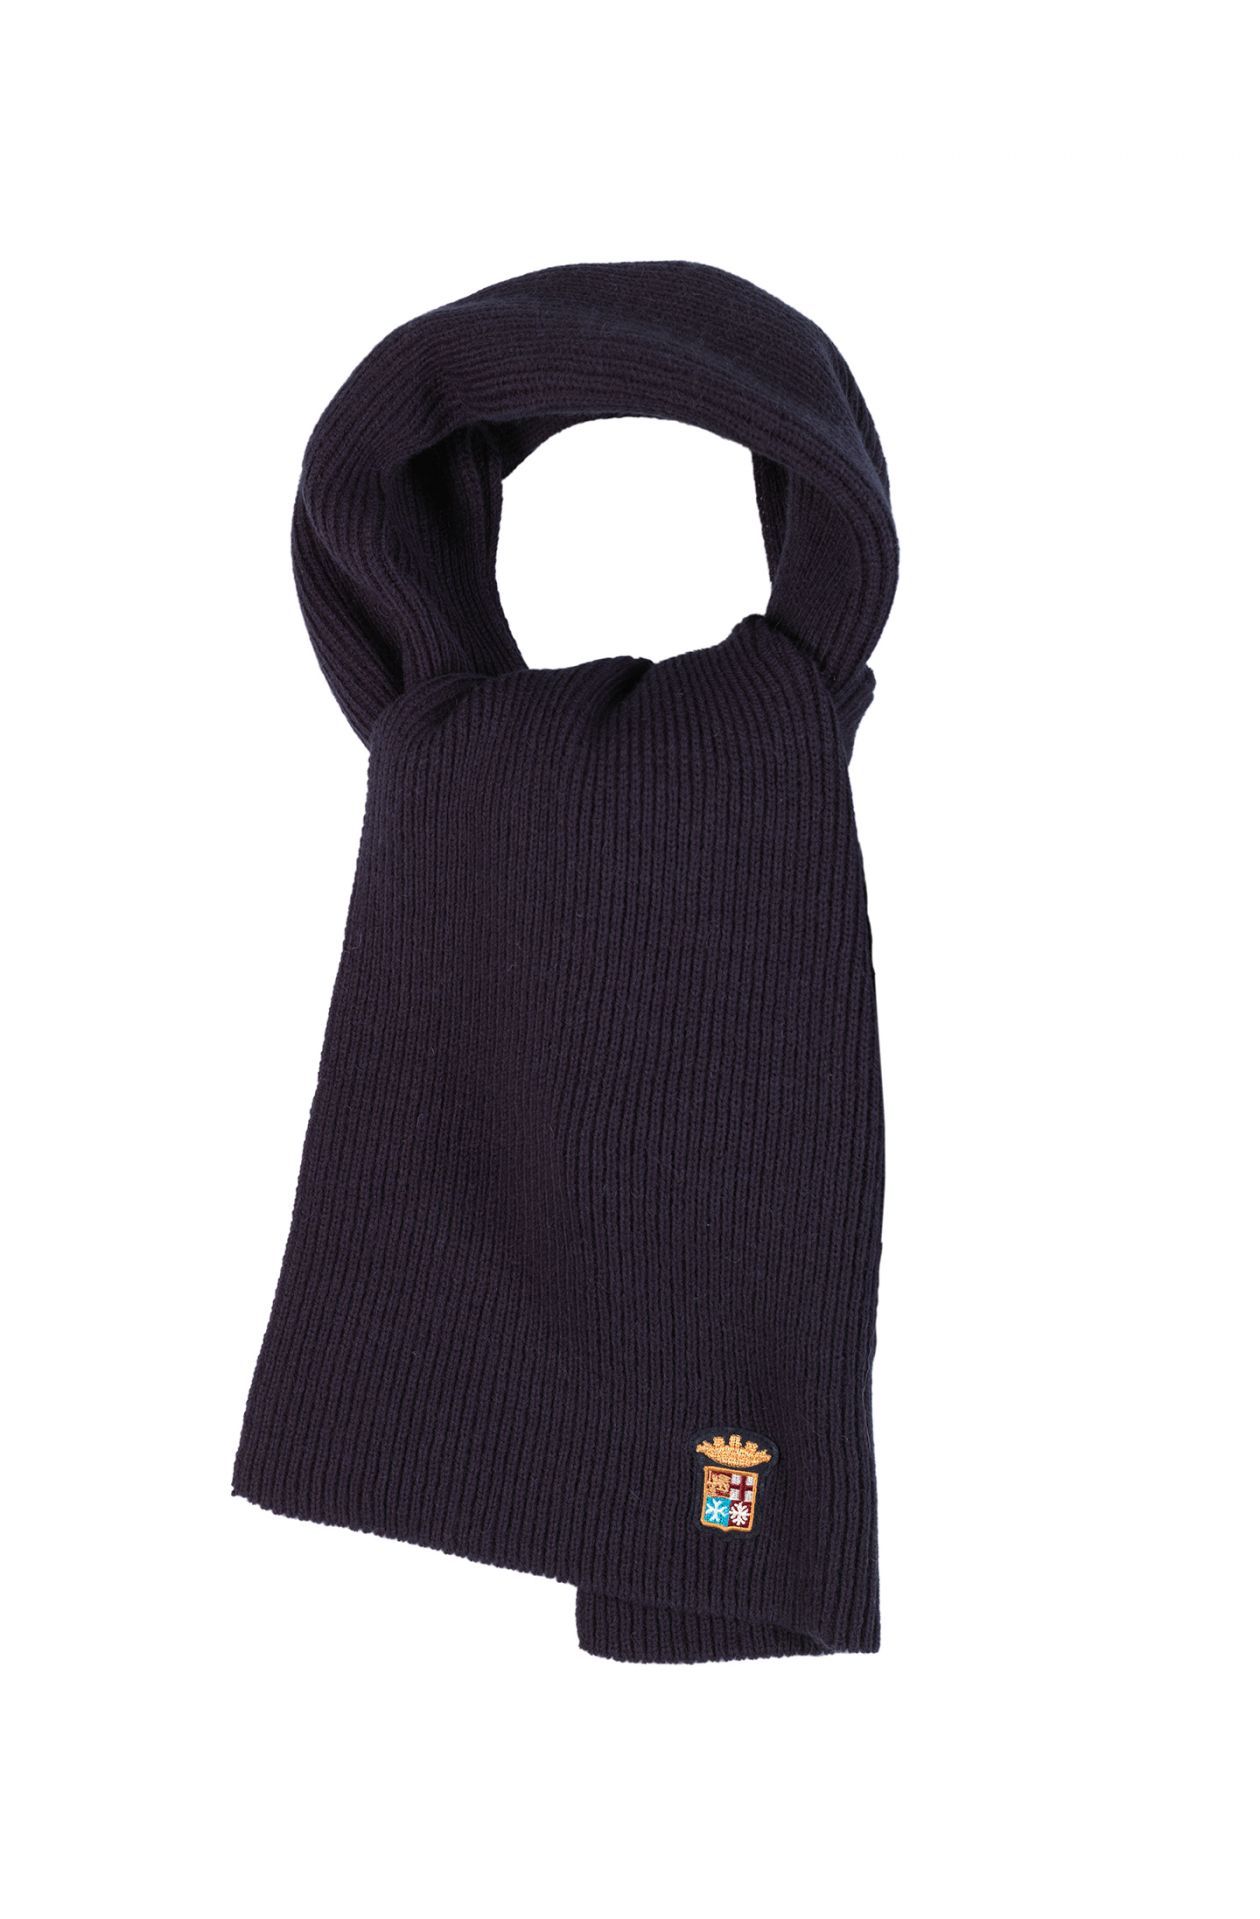 SCARF AND HAT NAVY